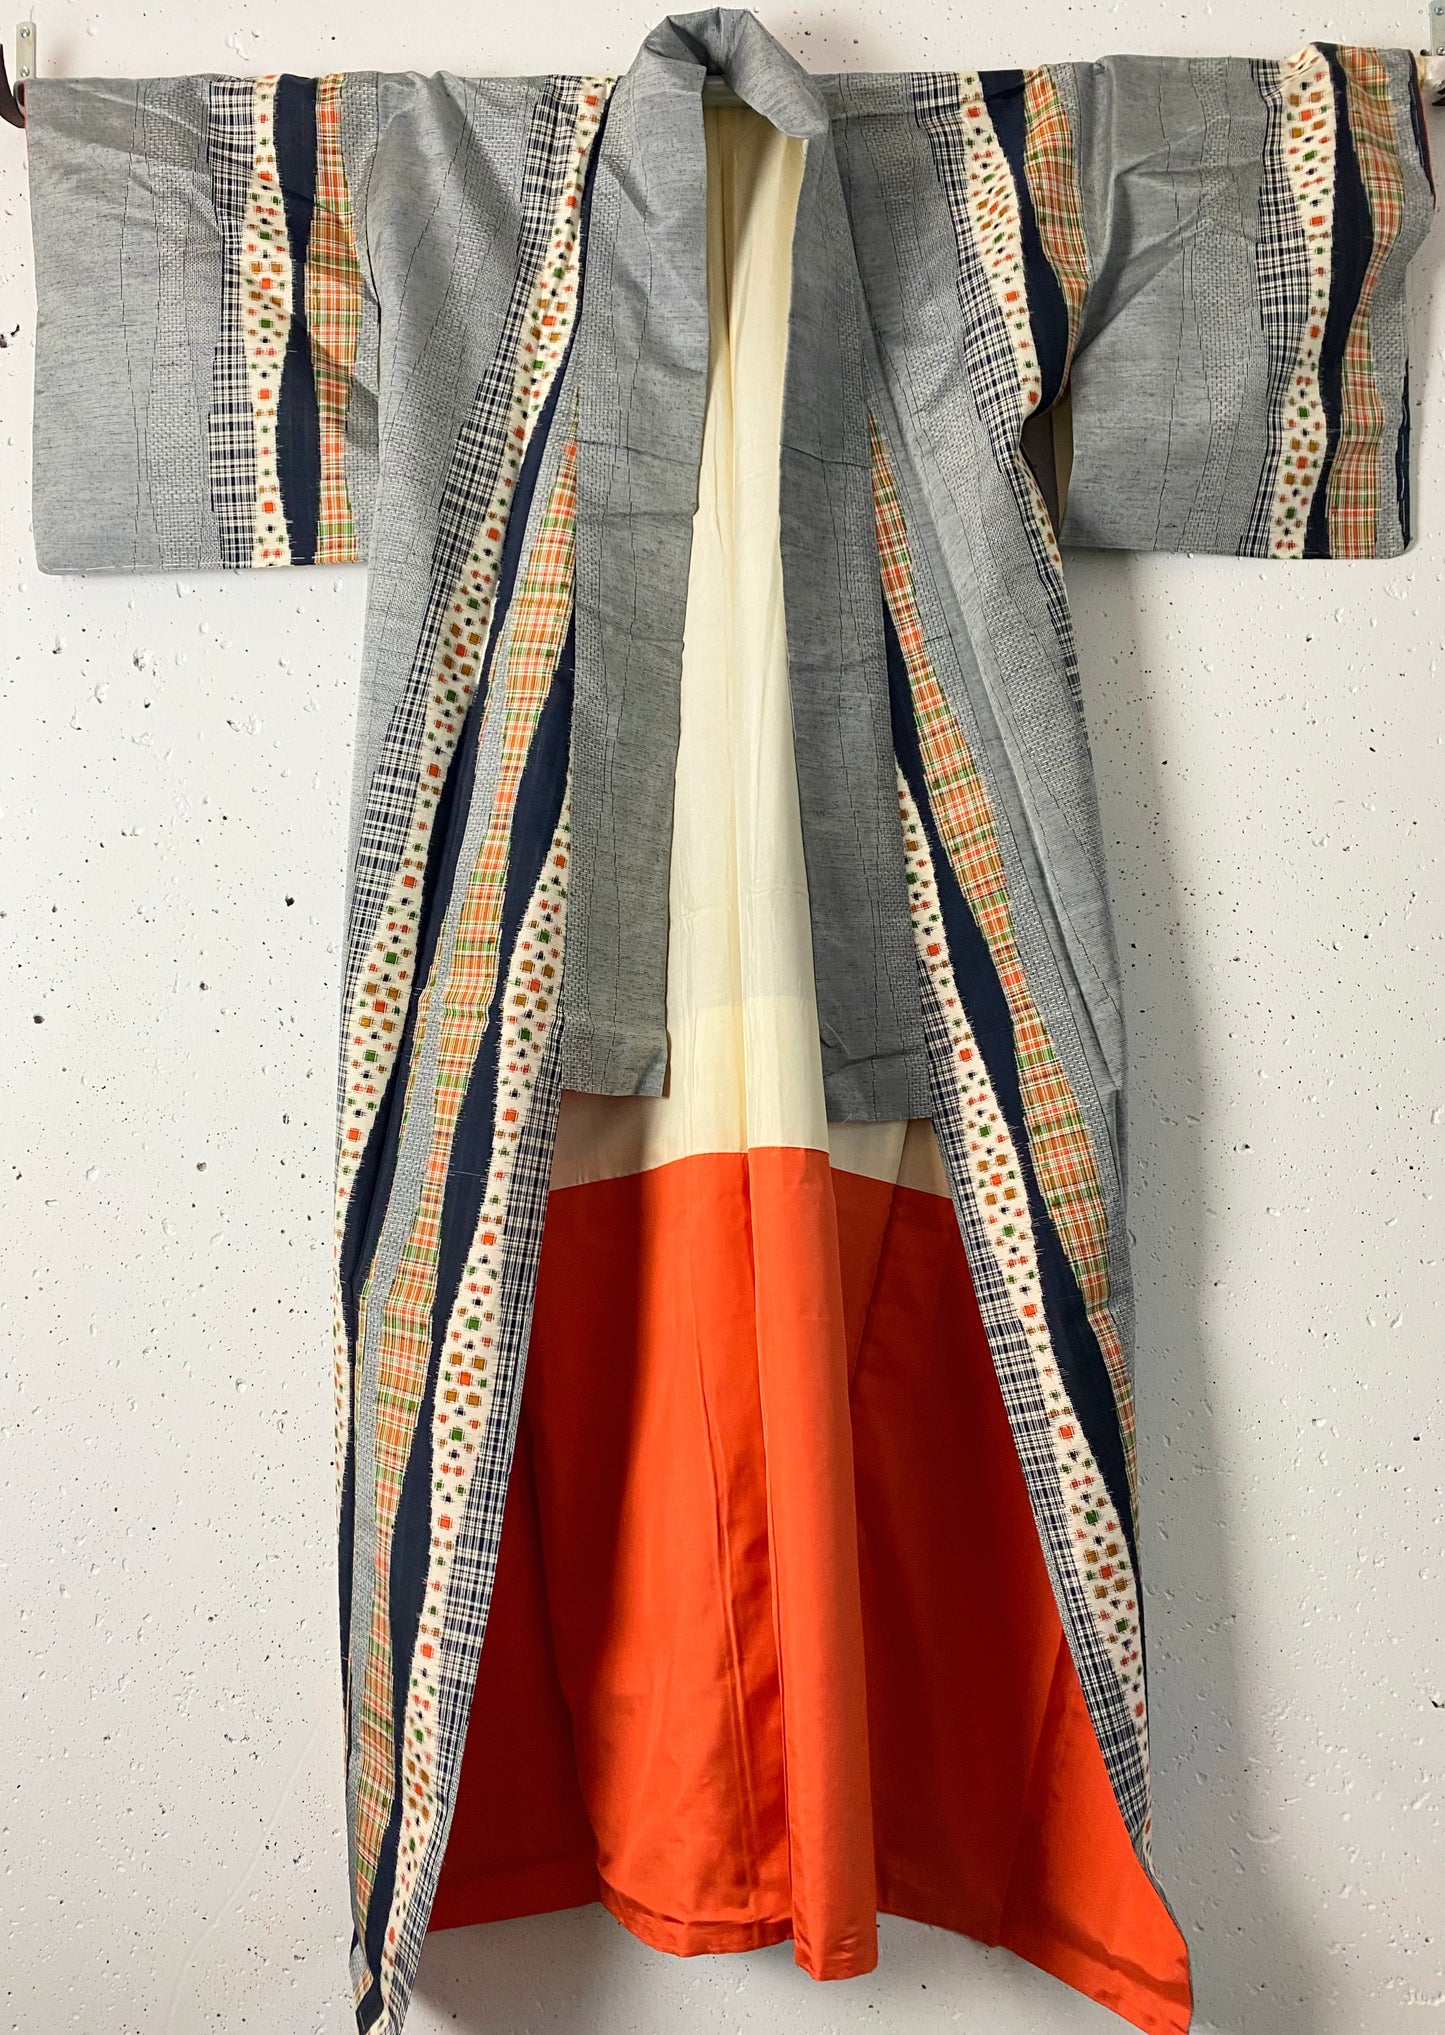 Quality Kimono/ Blue-grey vertical several types of pattern